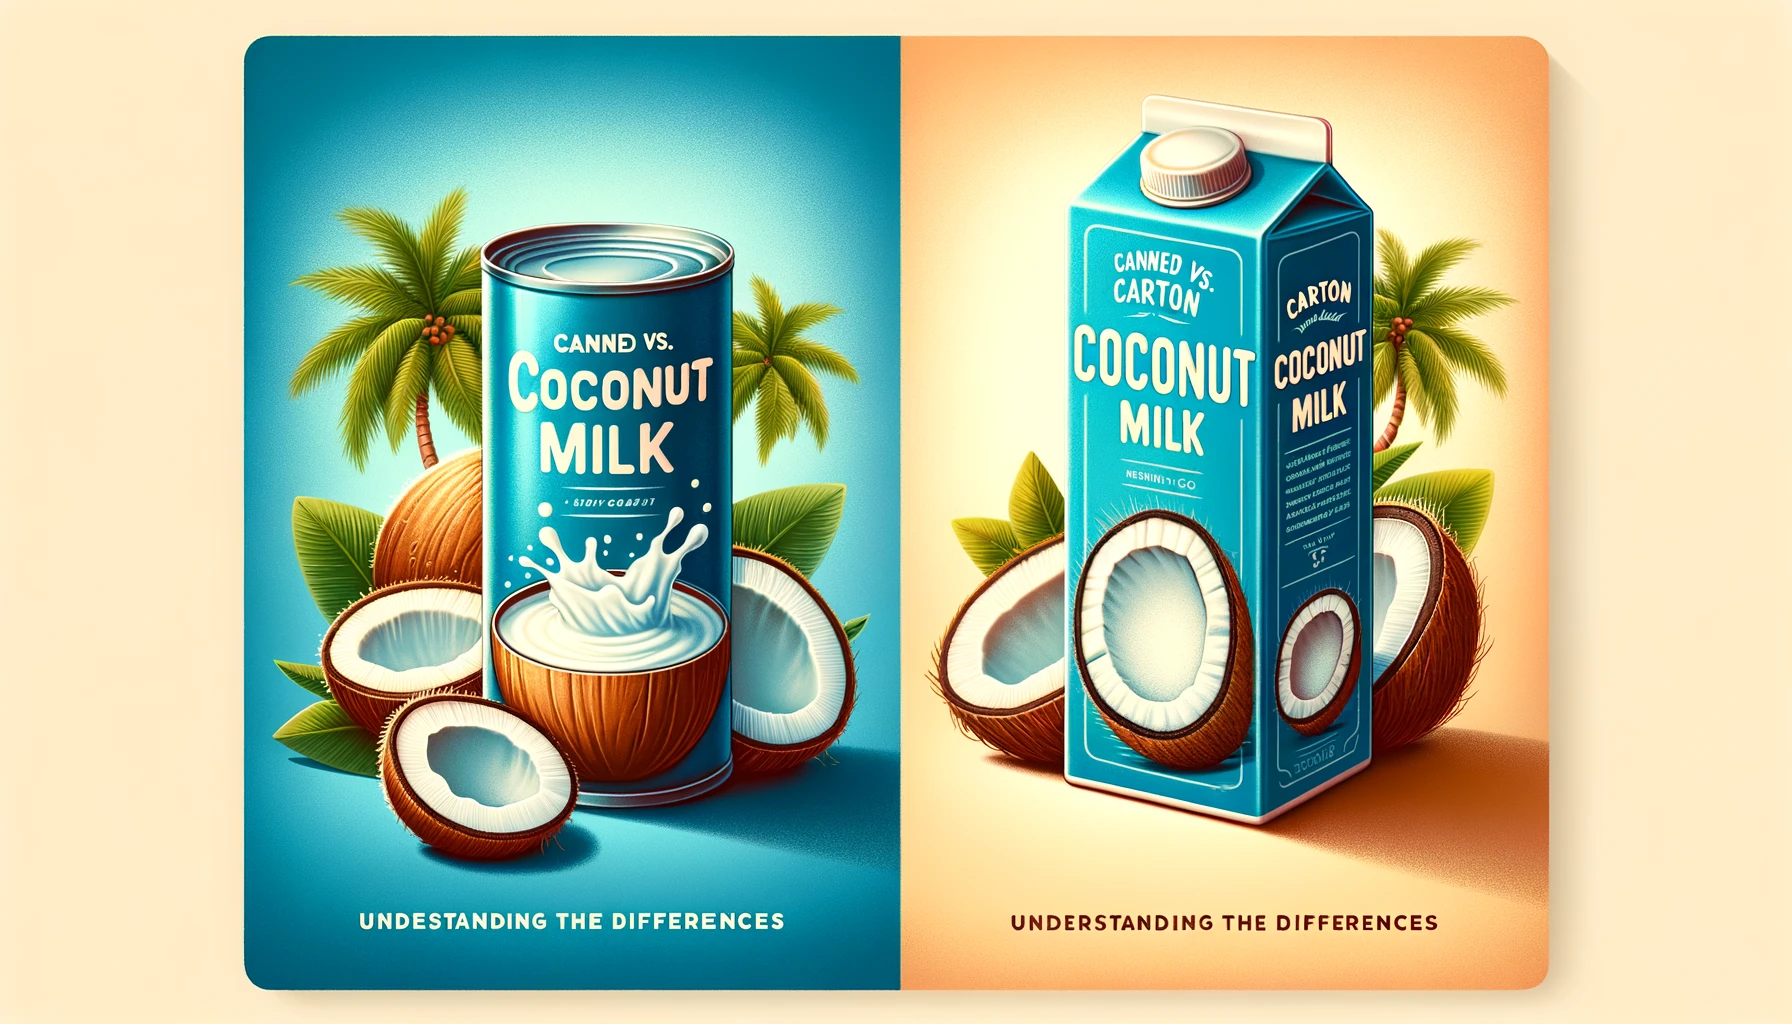 featured image for the blog post about the differences between canned and carton coconut milk